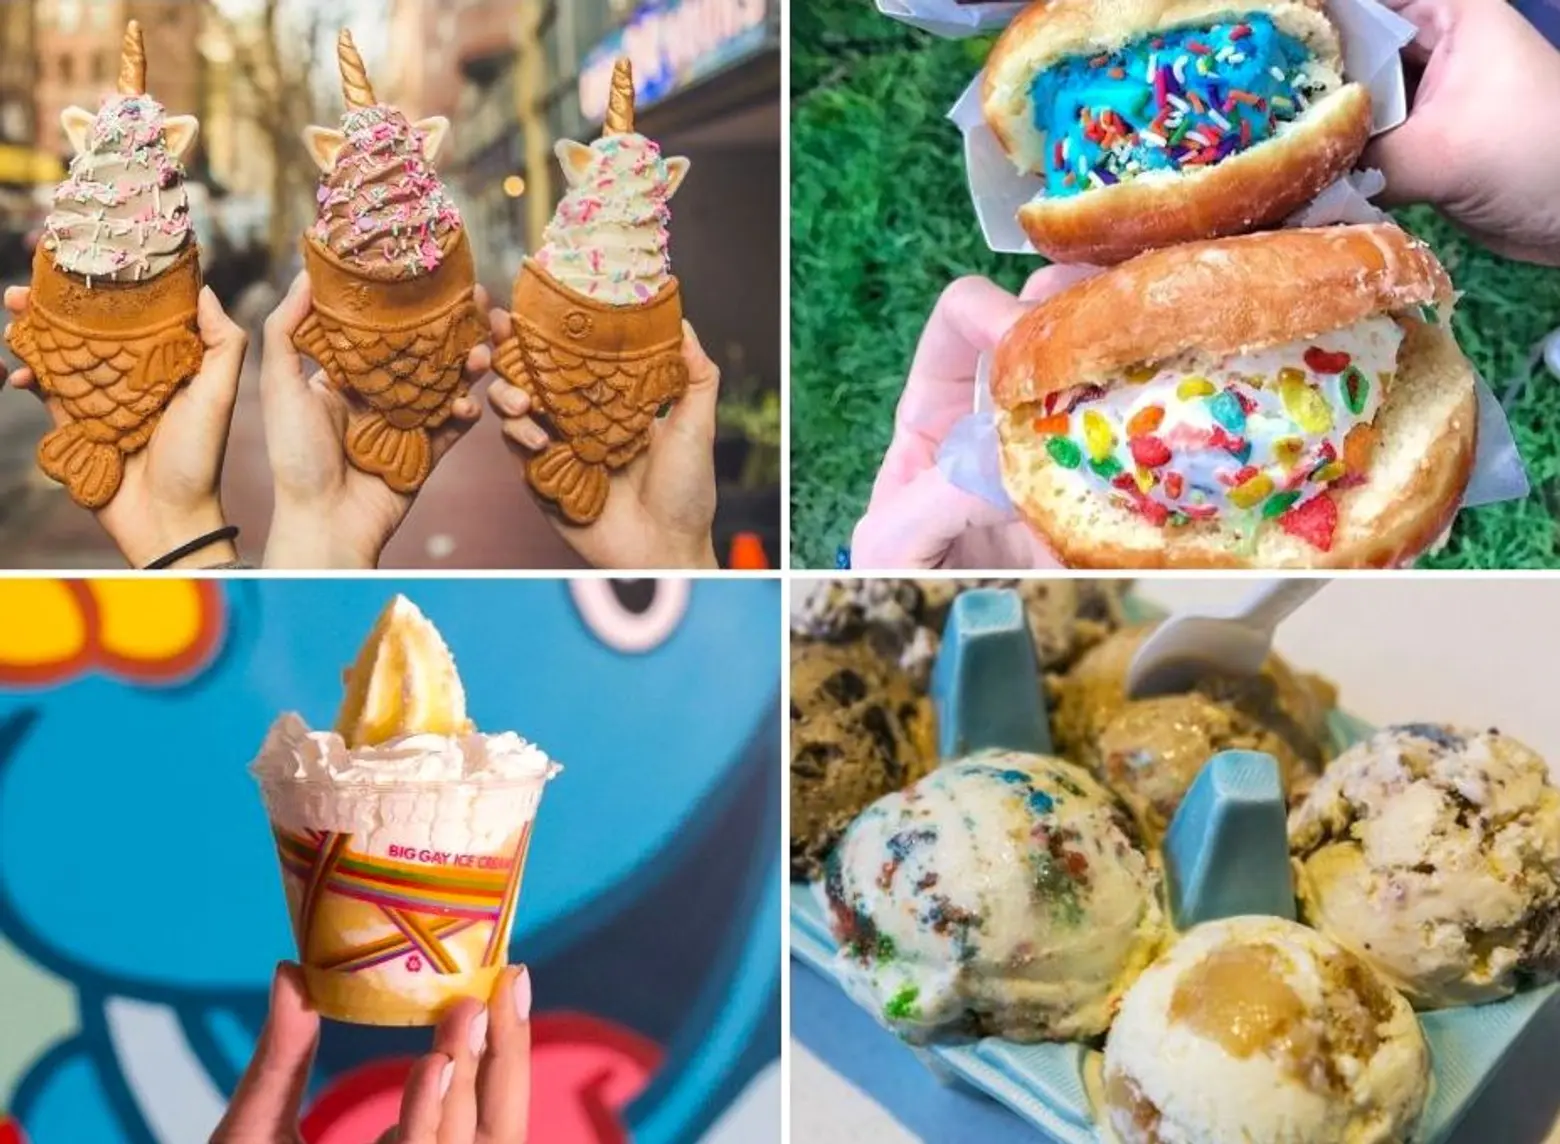 An NYC Shop Is Making Insane Rolled Ice Cream And It's Mesmerizing